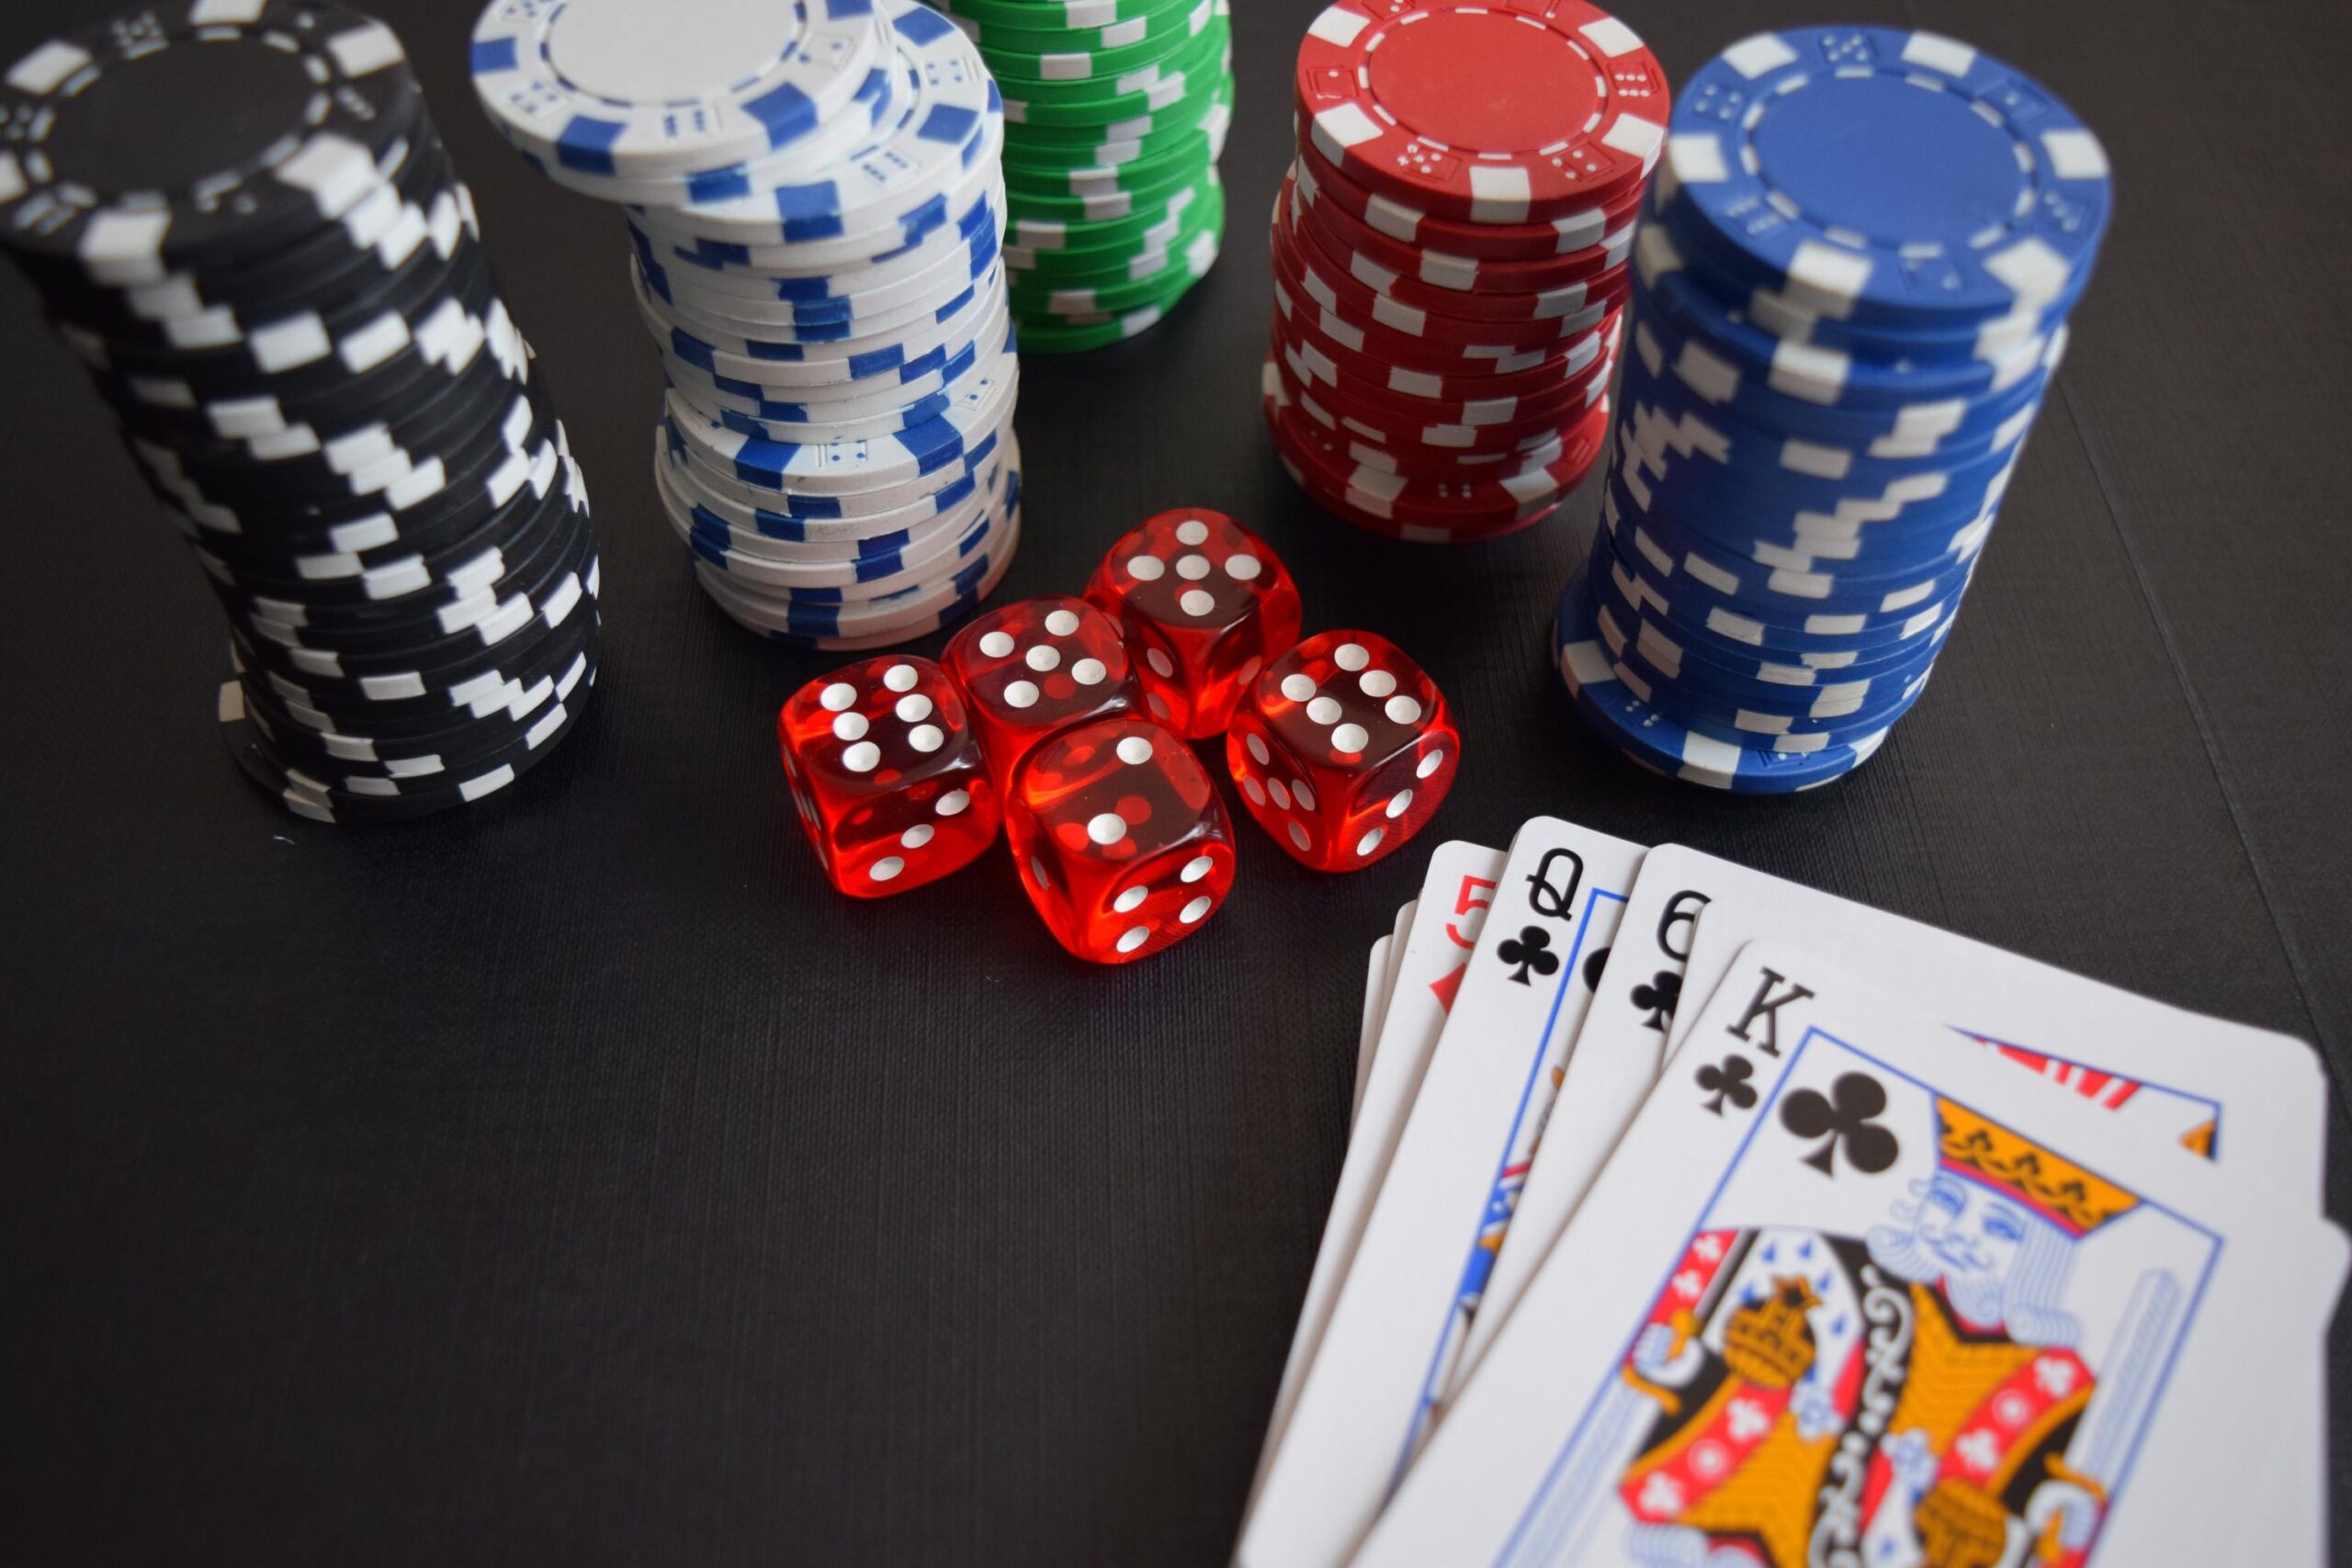 Which are the top 10 online casinos that offer the most comprehensive sports betting options?